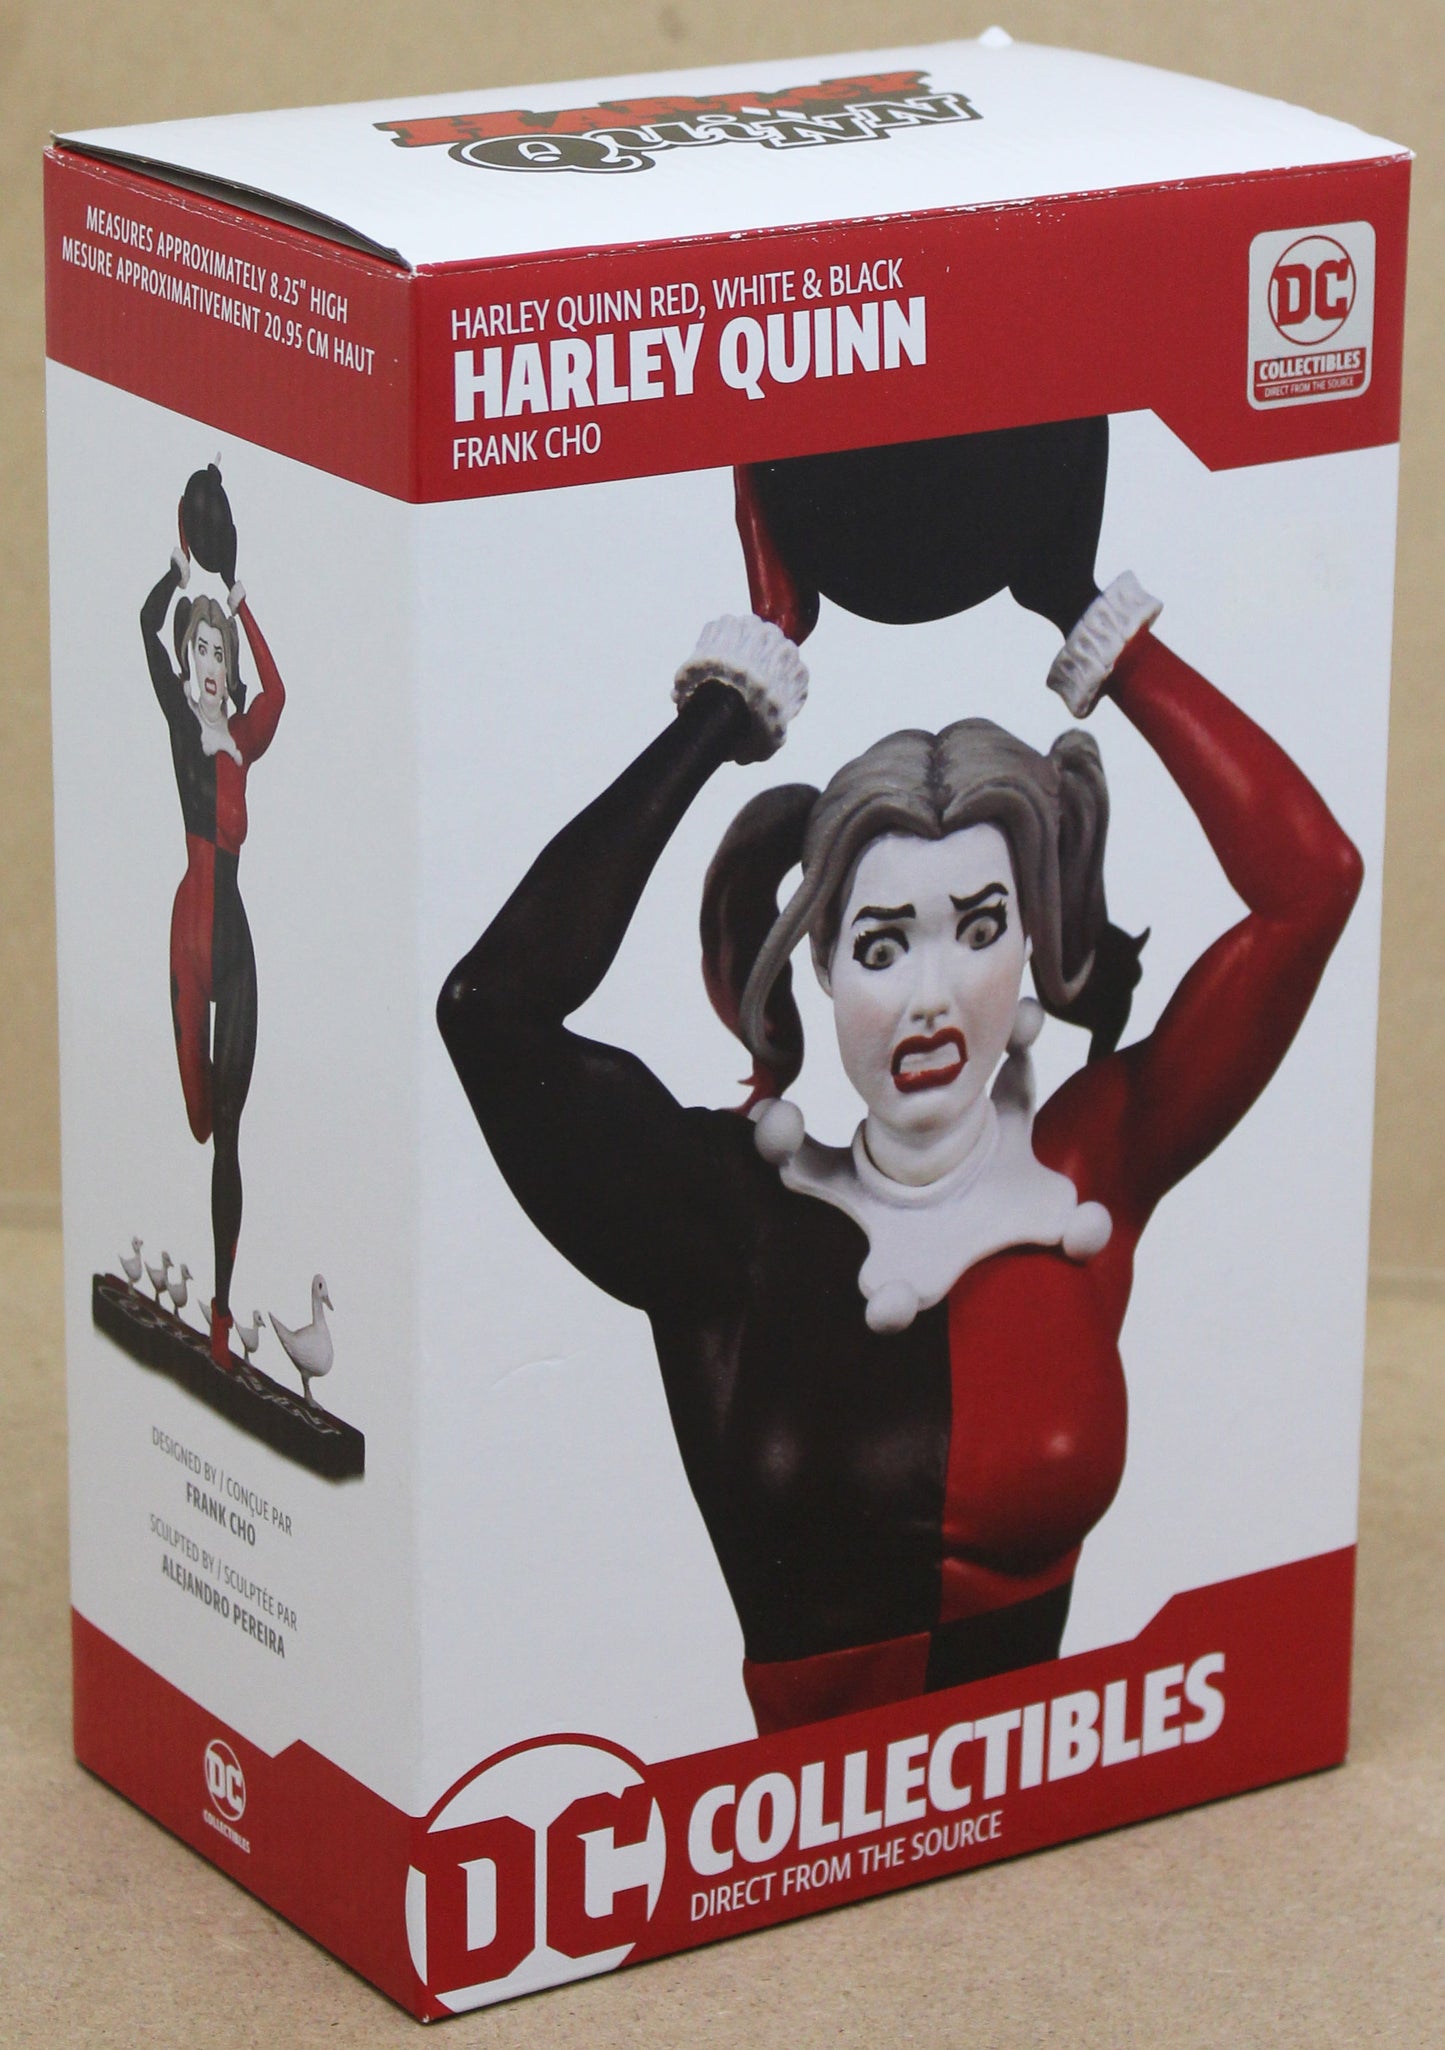 Harley Quinn Statue Red White & Black by Frank Cho